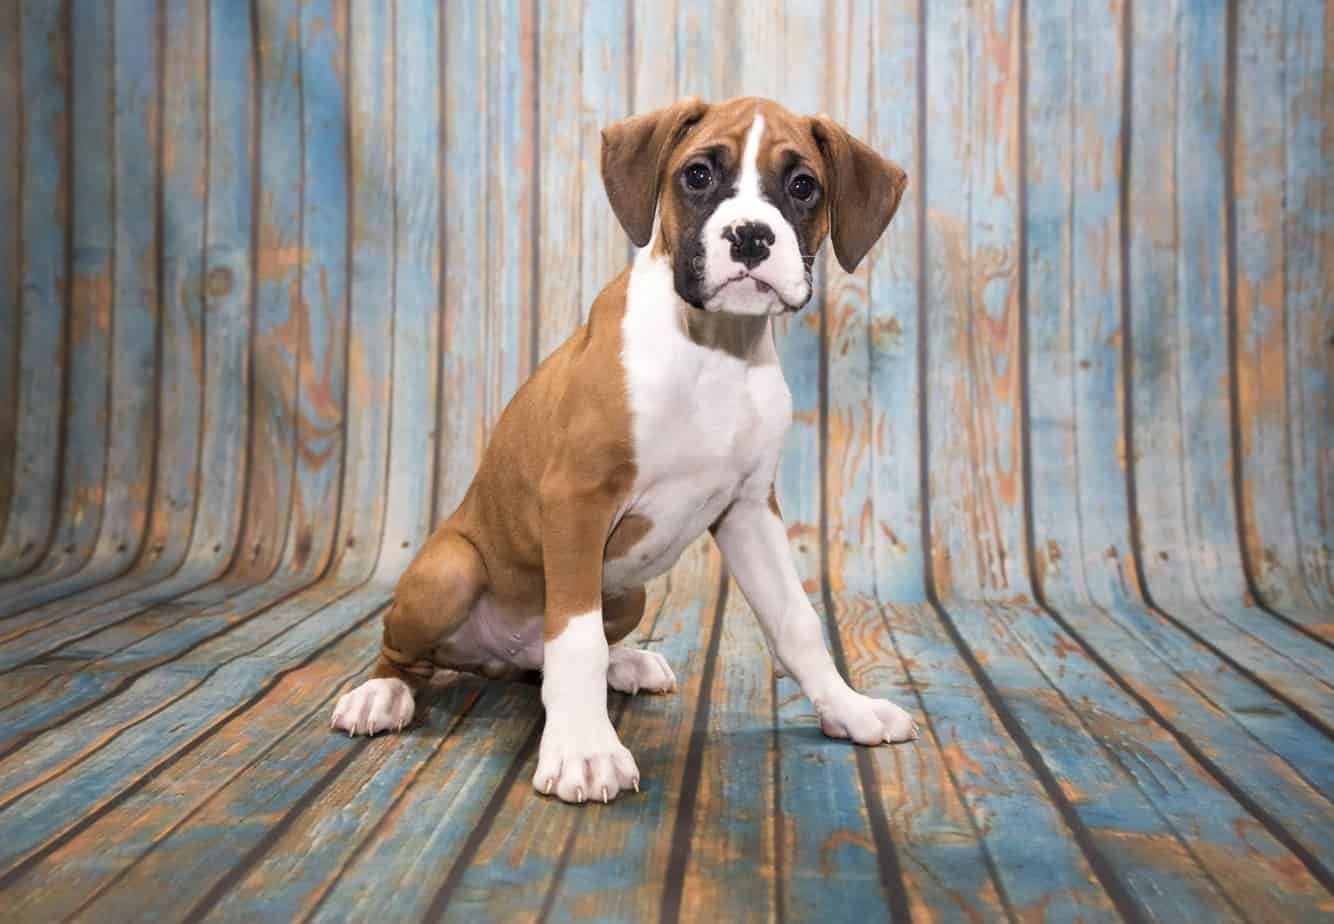 Where can I find a good Boxer puppy?